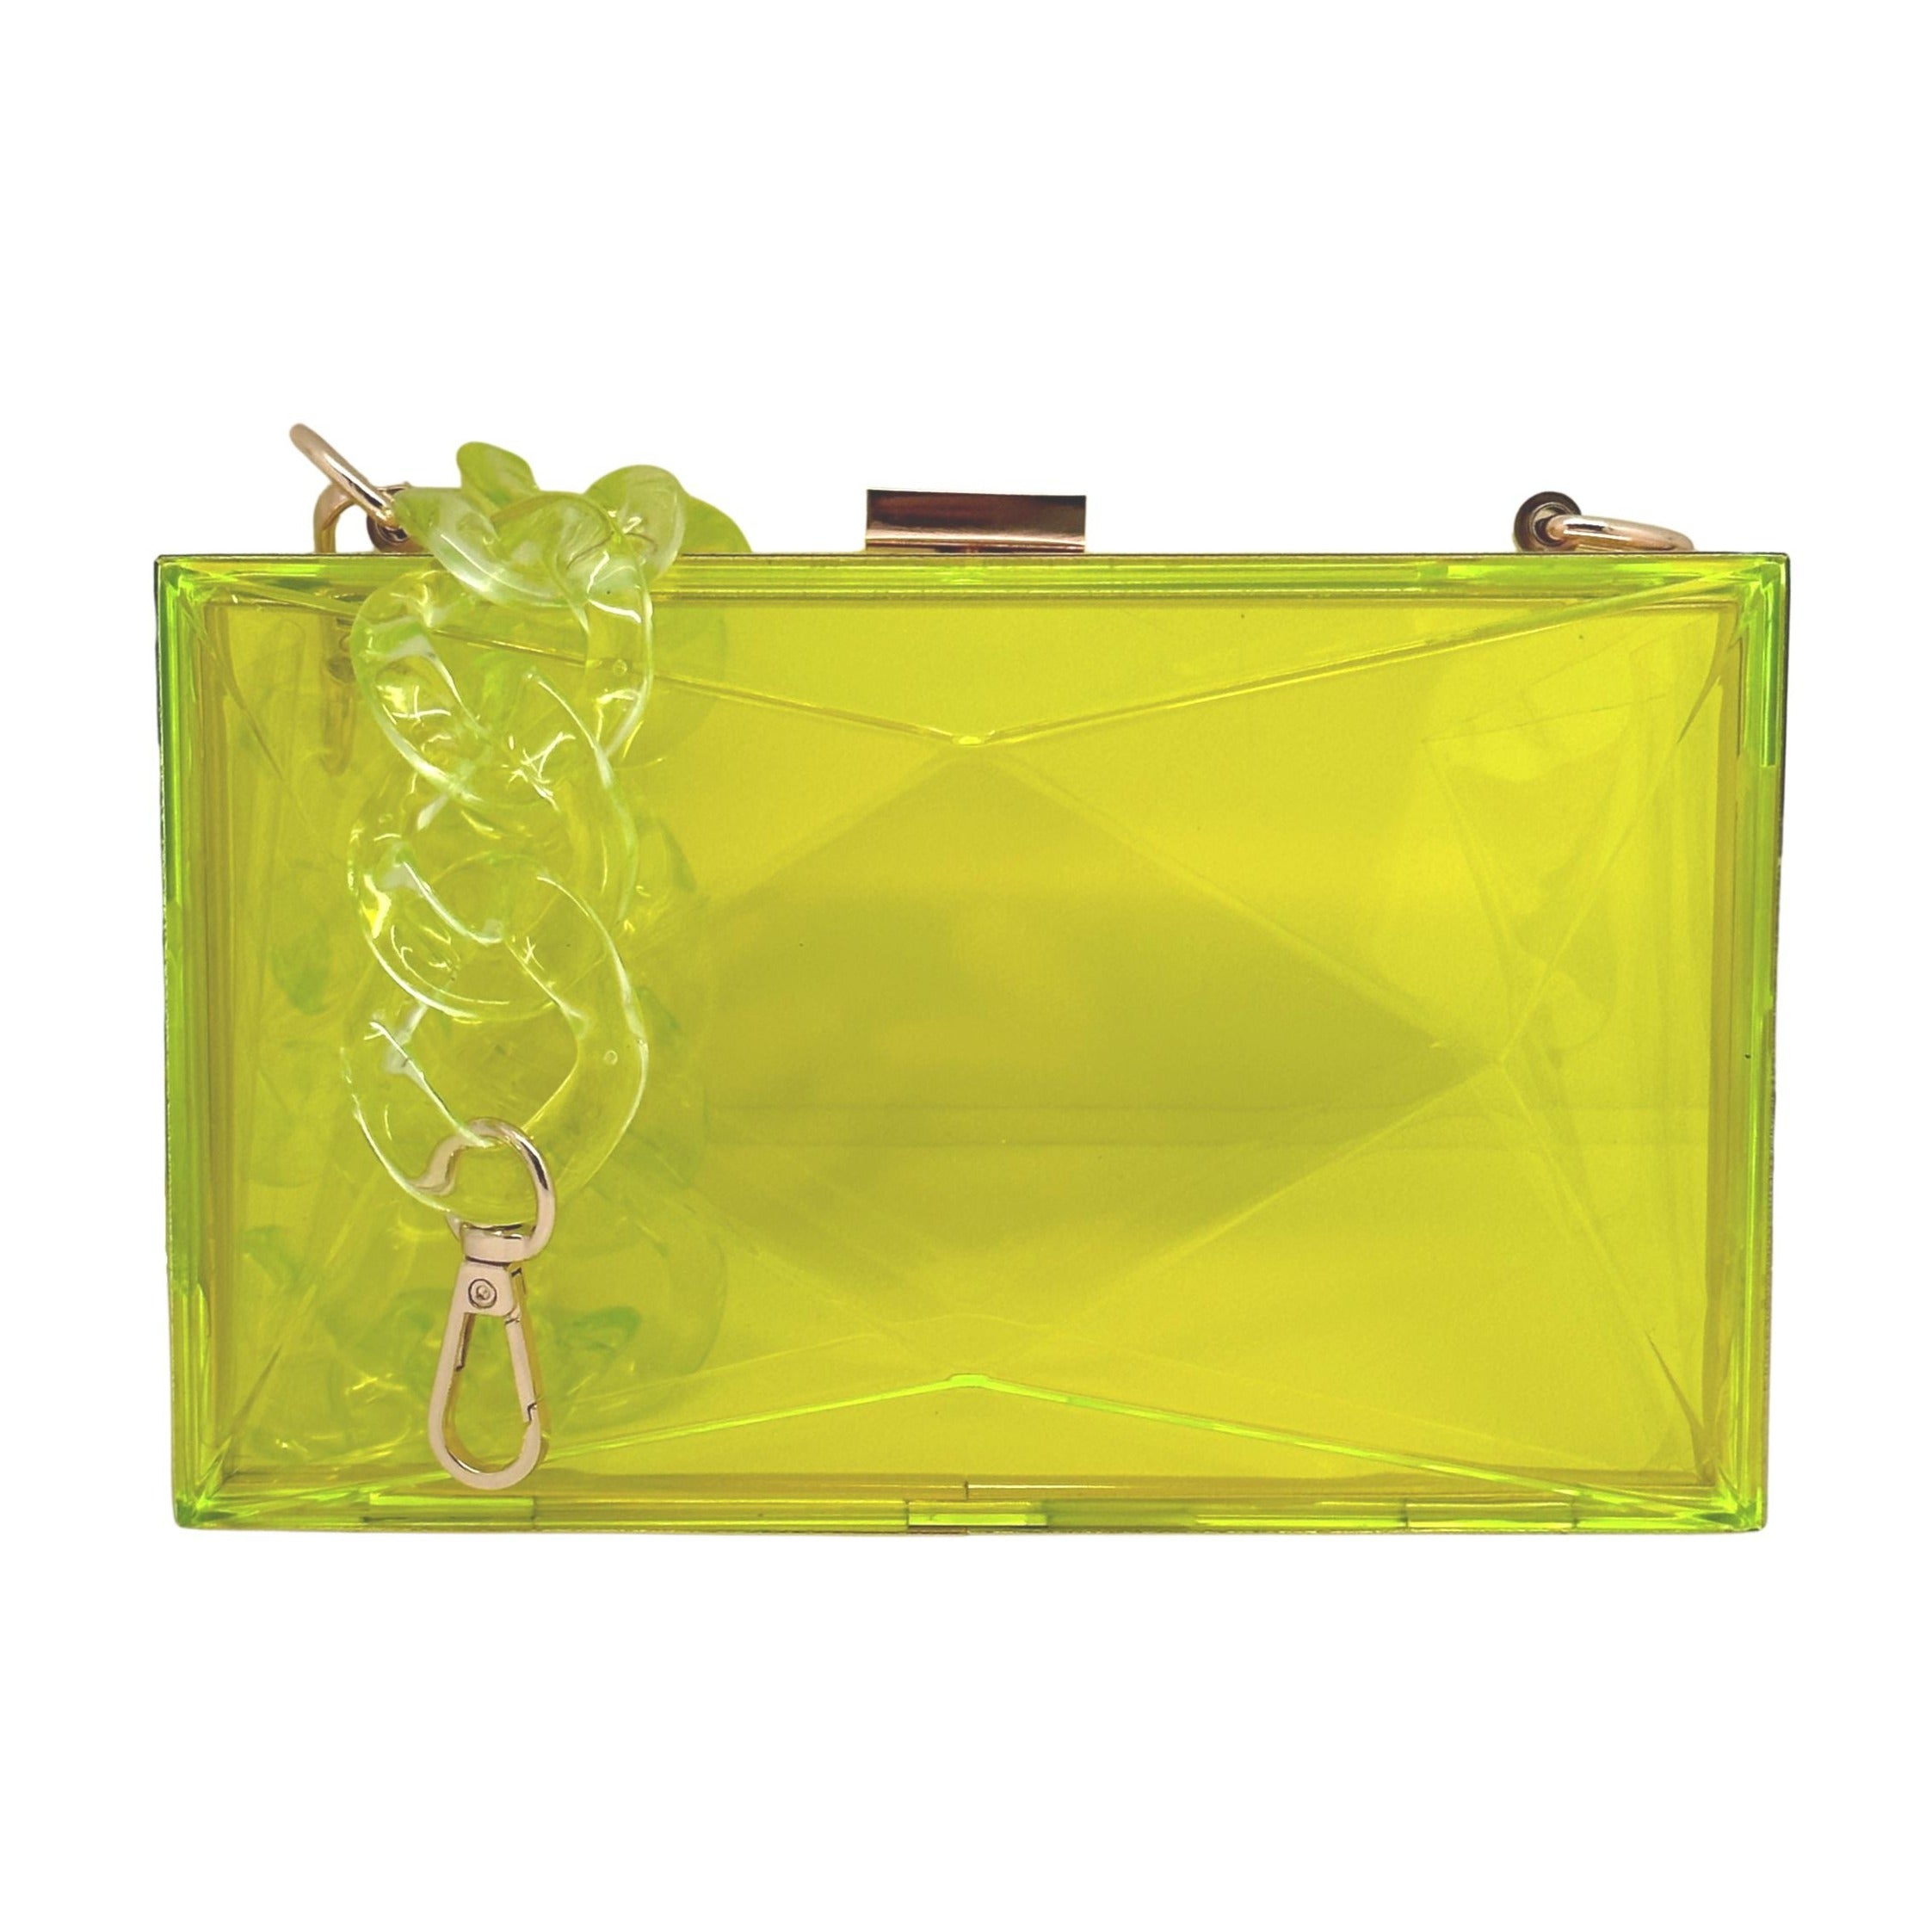 NEW The Marilyn Faceted Acrylic Box Purse